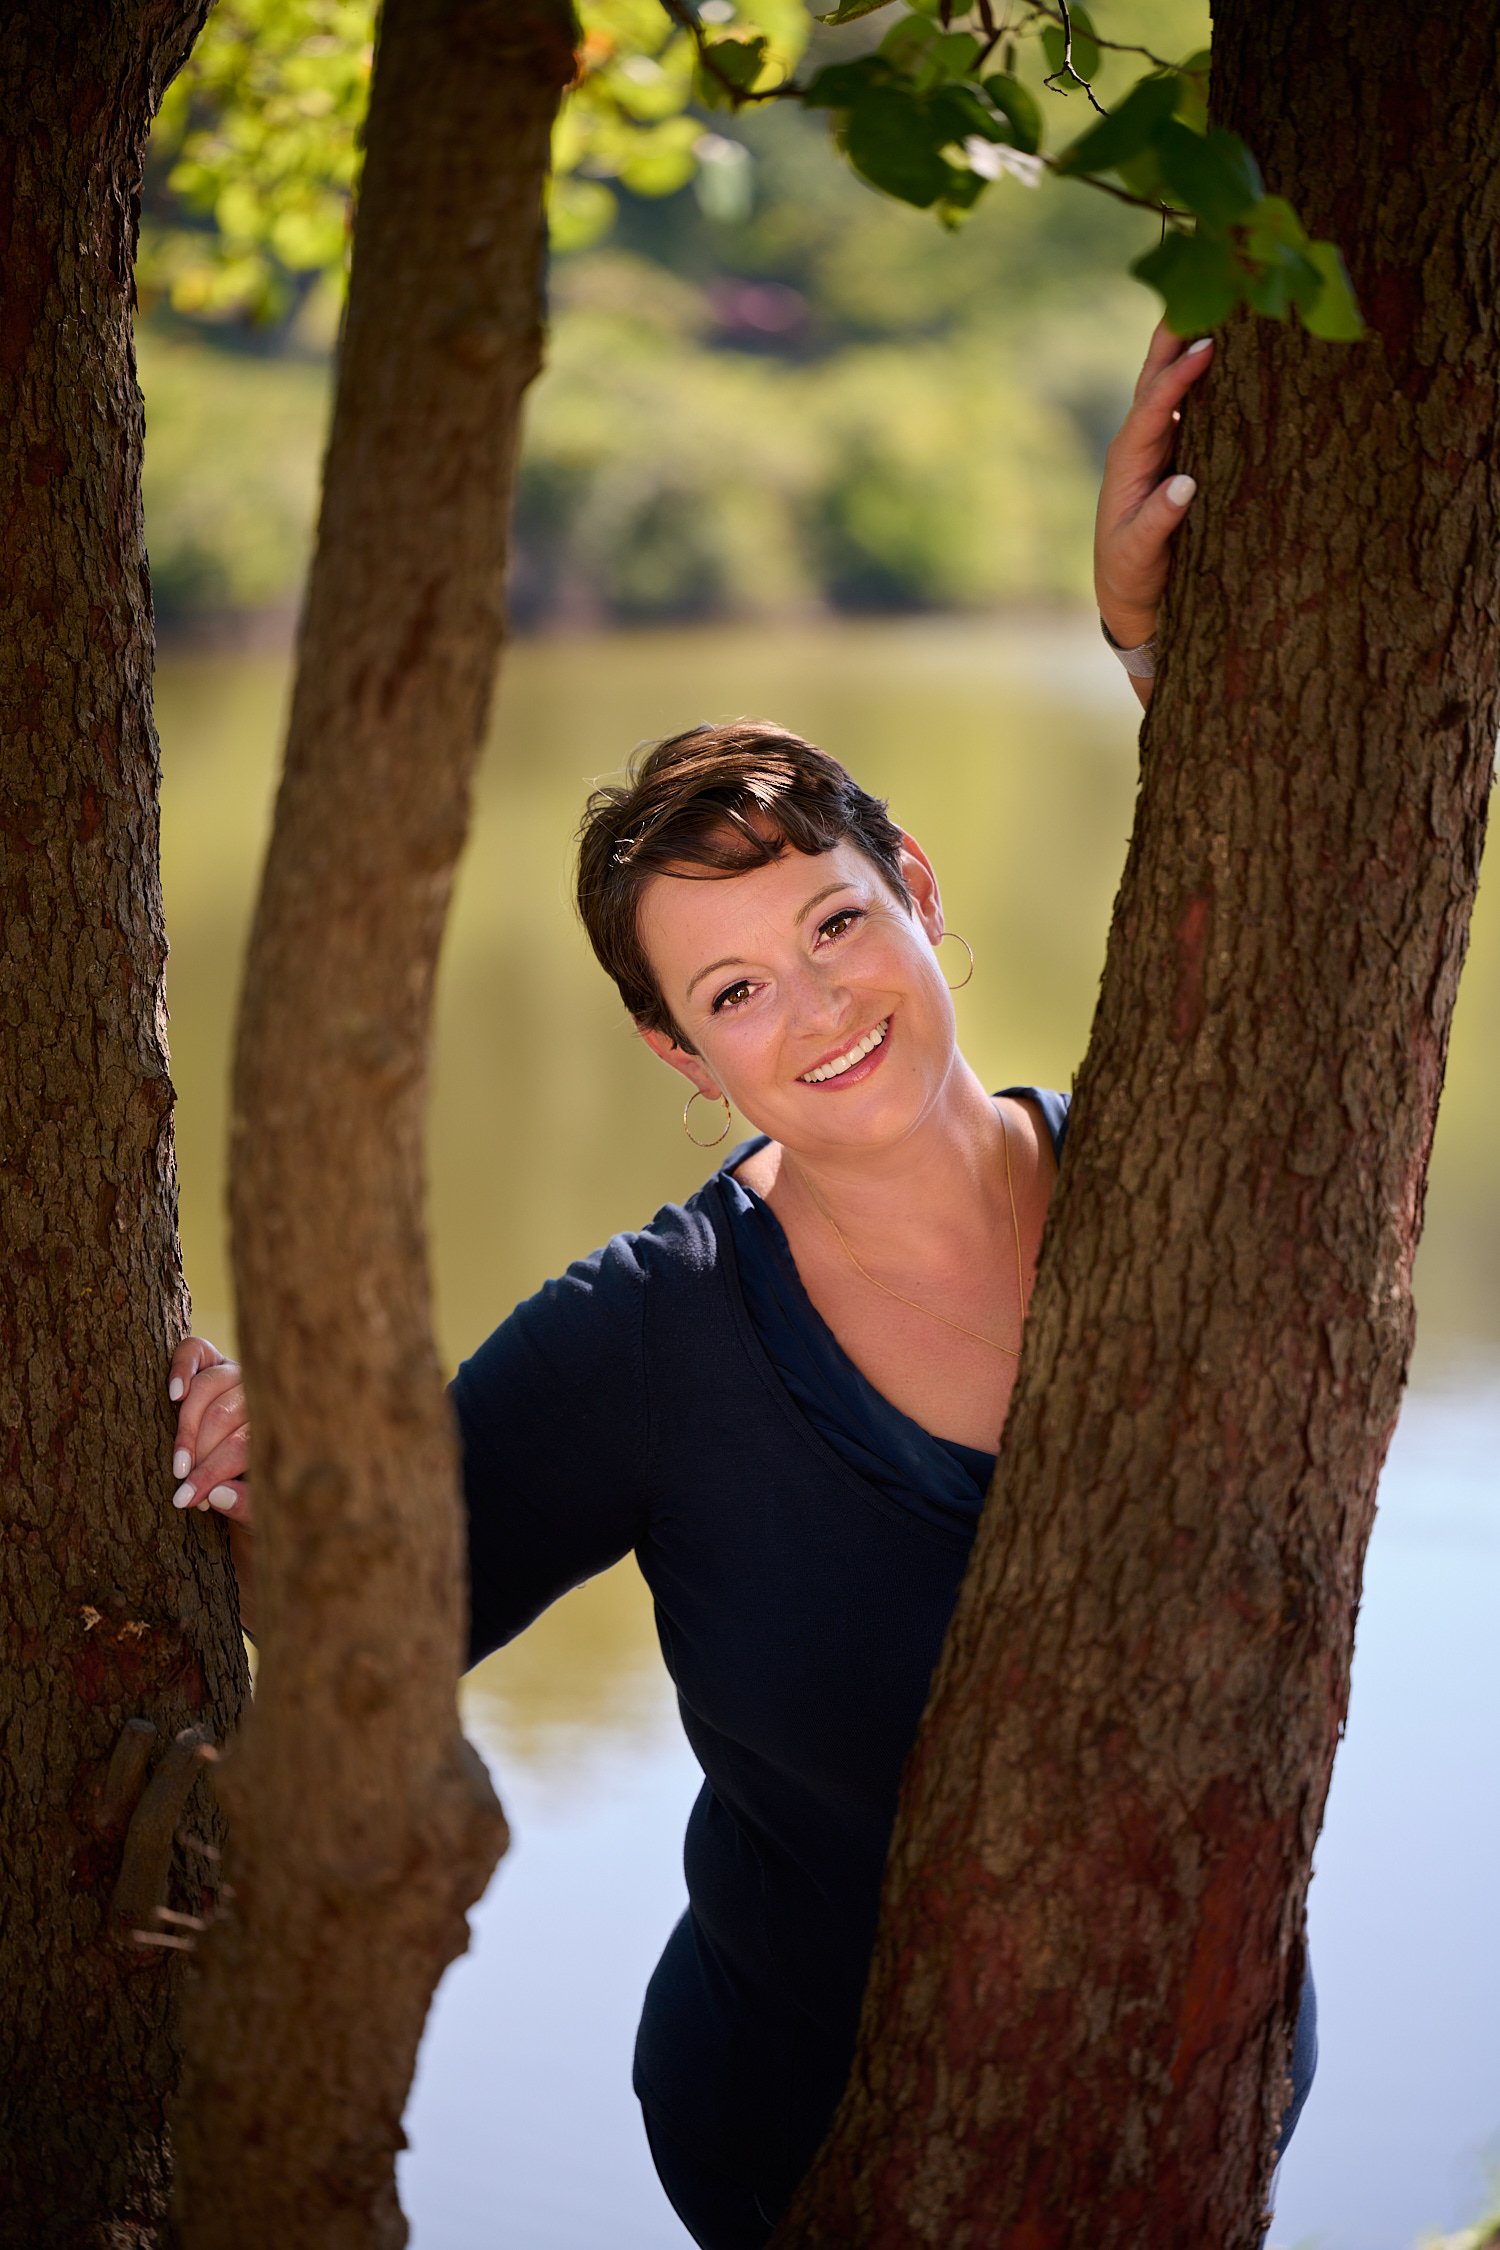  Rachael Zito is posing for business headshots and personal branding portraits on a warm sunny day in the park. She is smiling wide and standing in the tall grass and by a tree wearing a v-neck blouse 